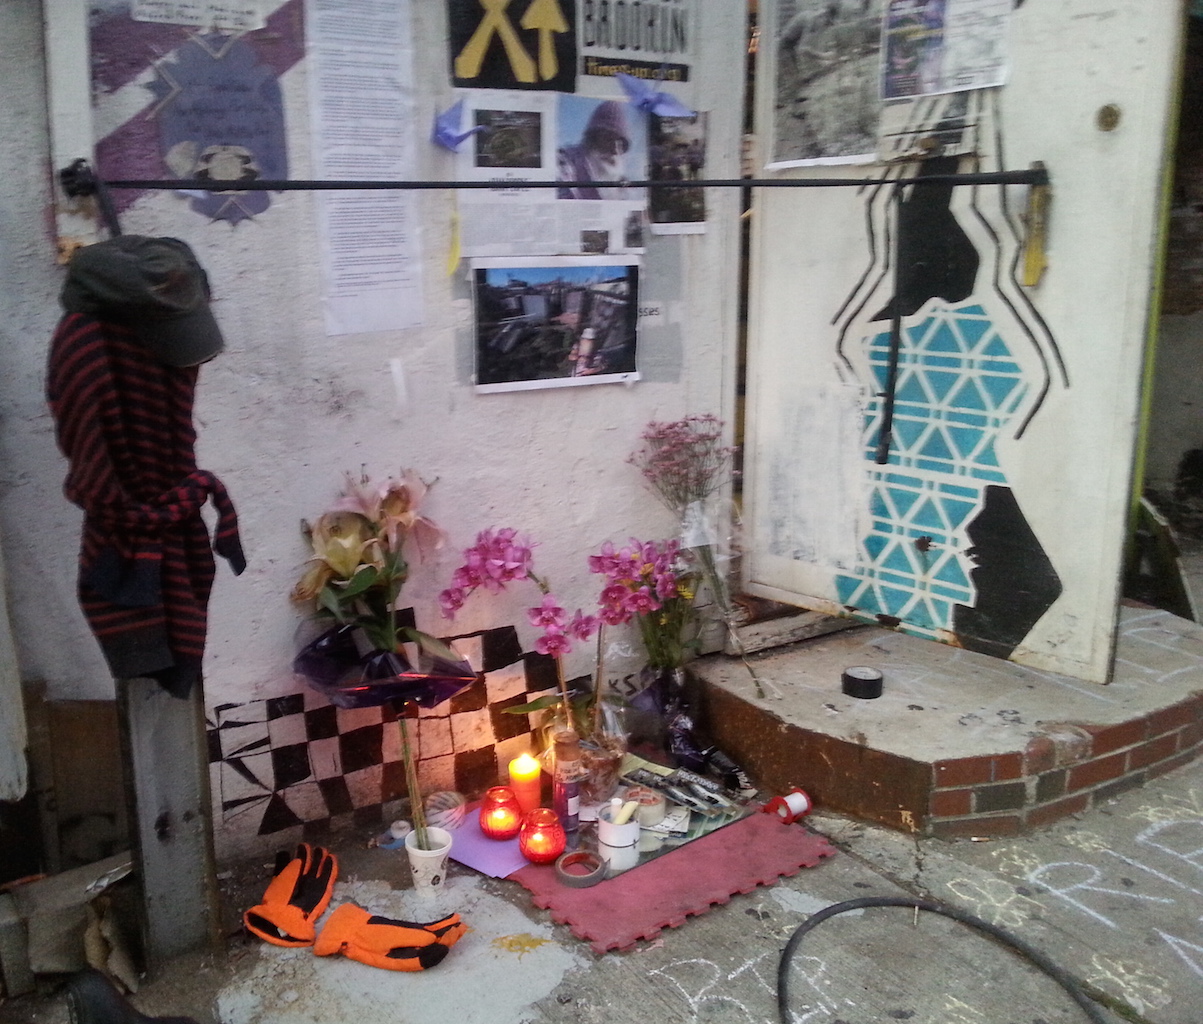 A memorial to Adam Purple — including purple flowers and his orange winter gloves — is growing at the Time's Up space in South Williamsburg.